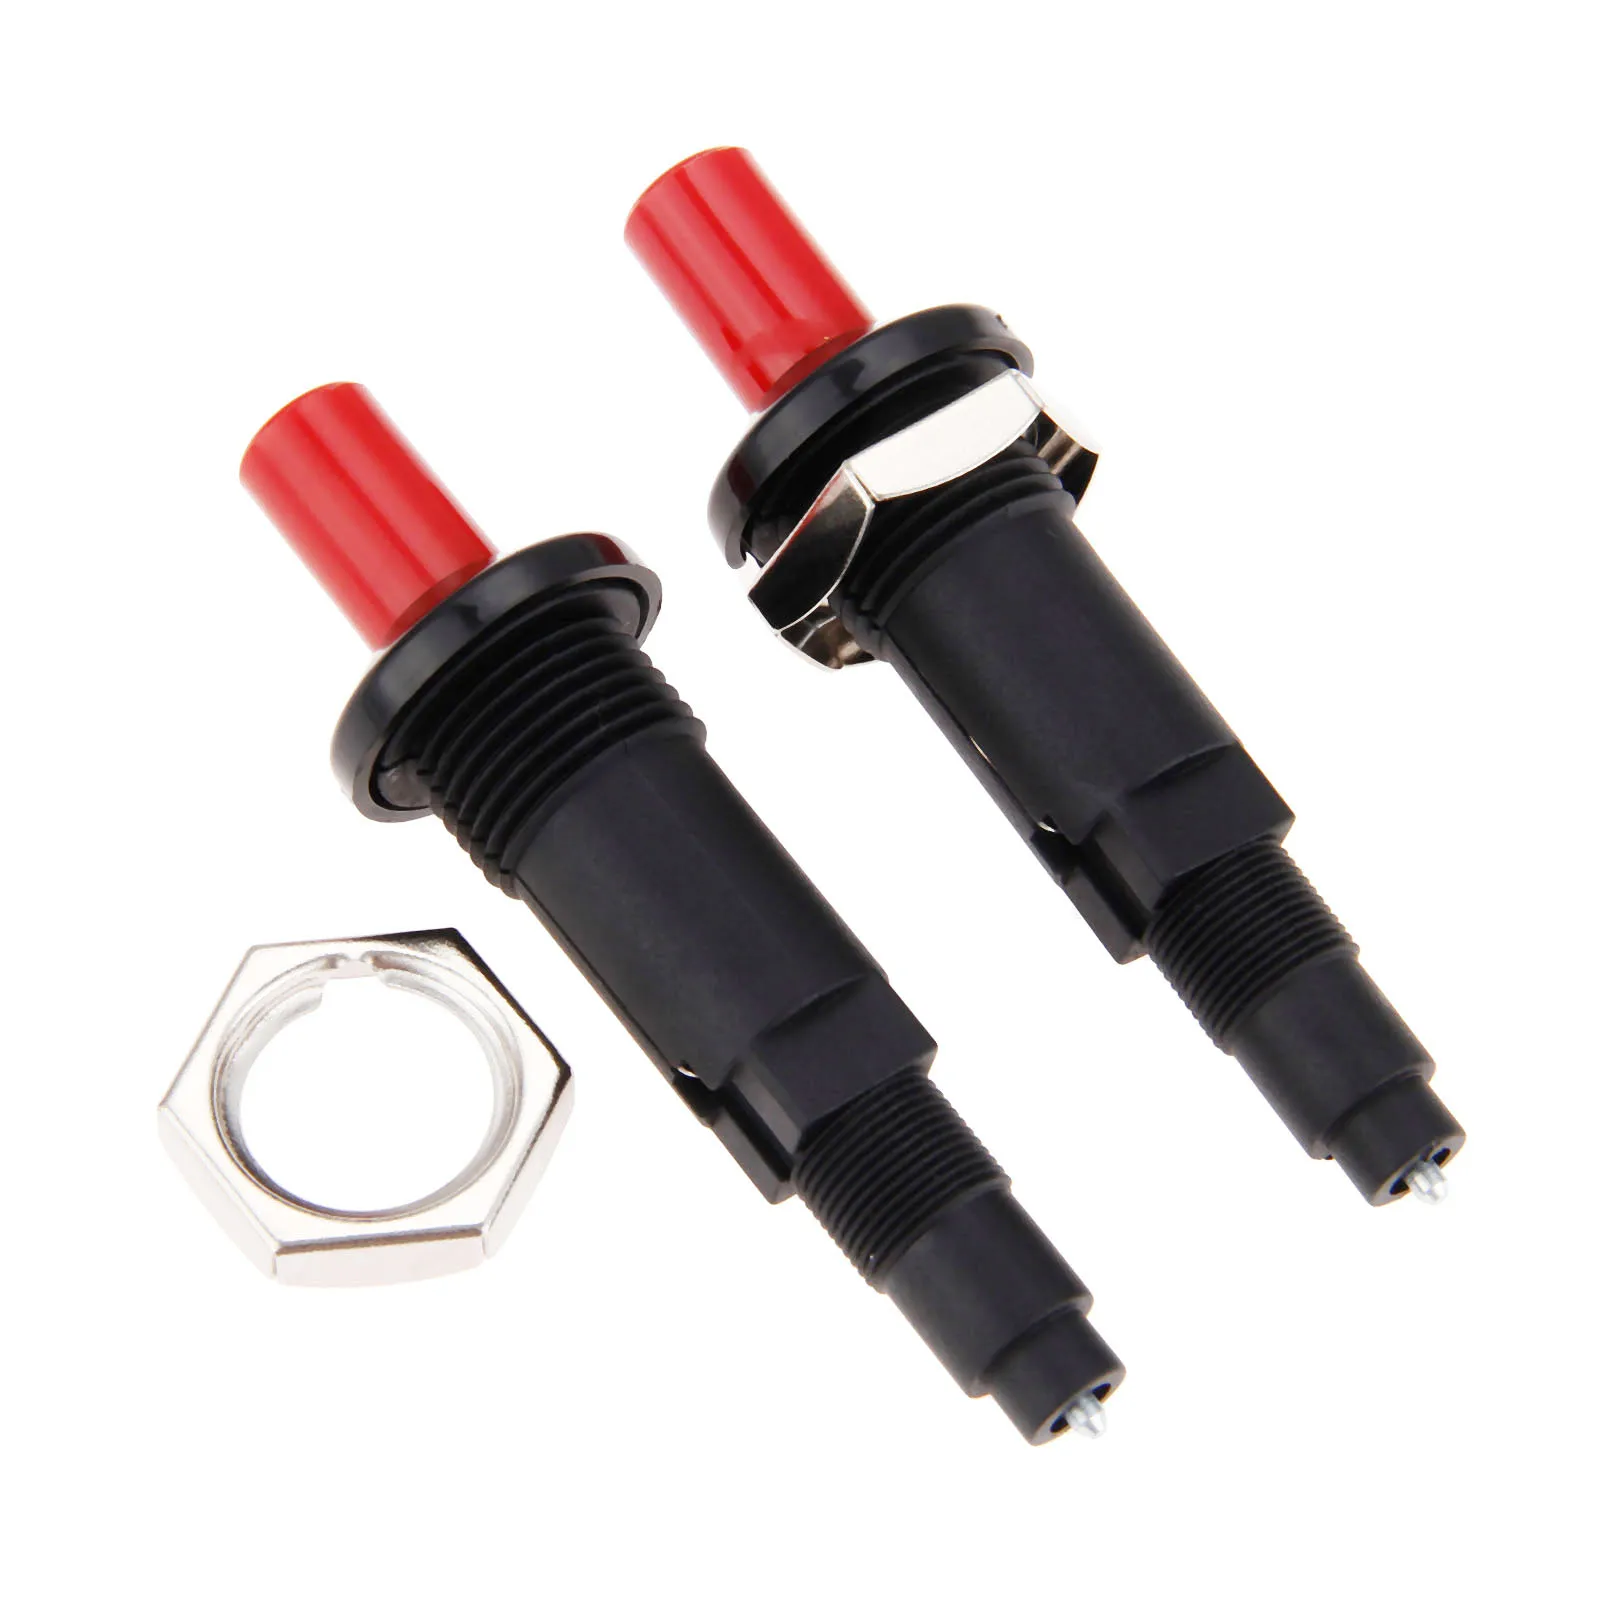 

2pcs Ignitor Kit Grill Stove Igniter Spark Plug Push Button Ceramic Replace Parts for Gas Heaters BBQ Grill Igniter Gas Stove